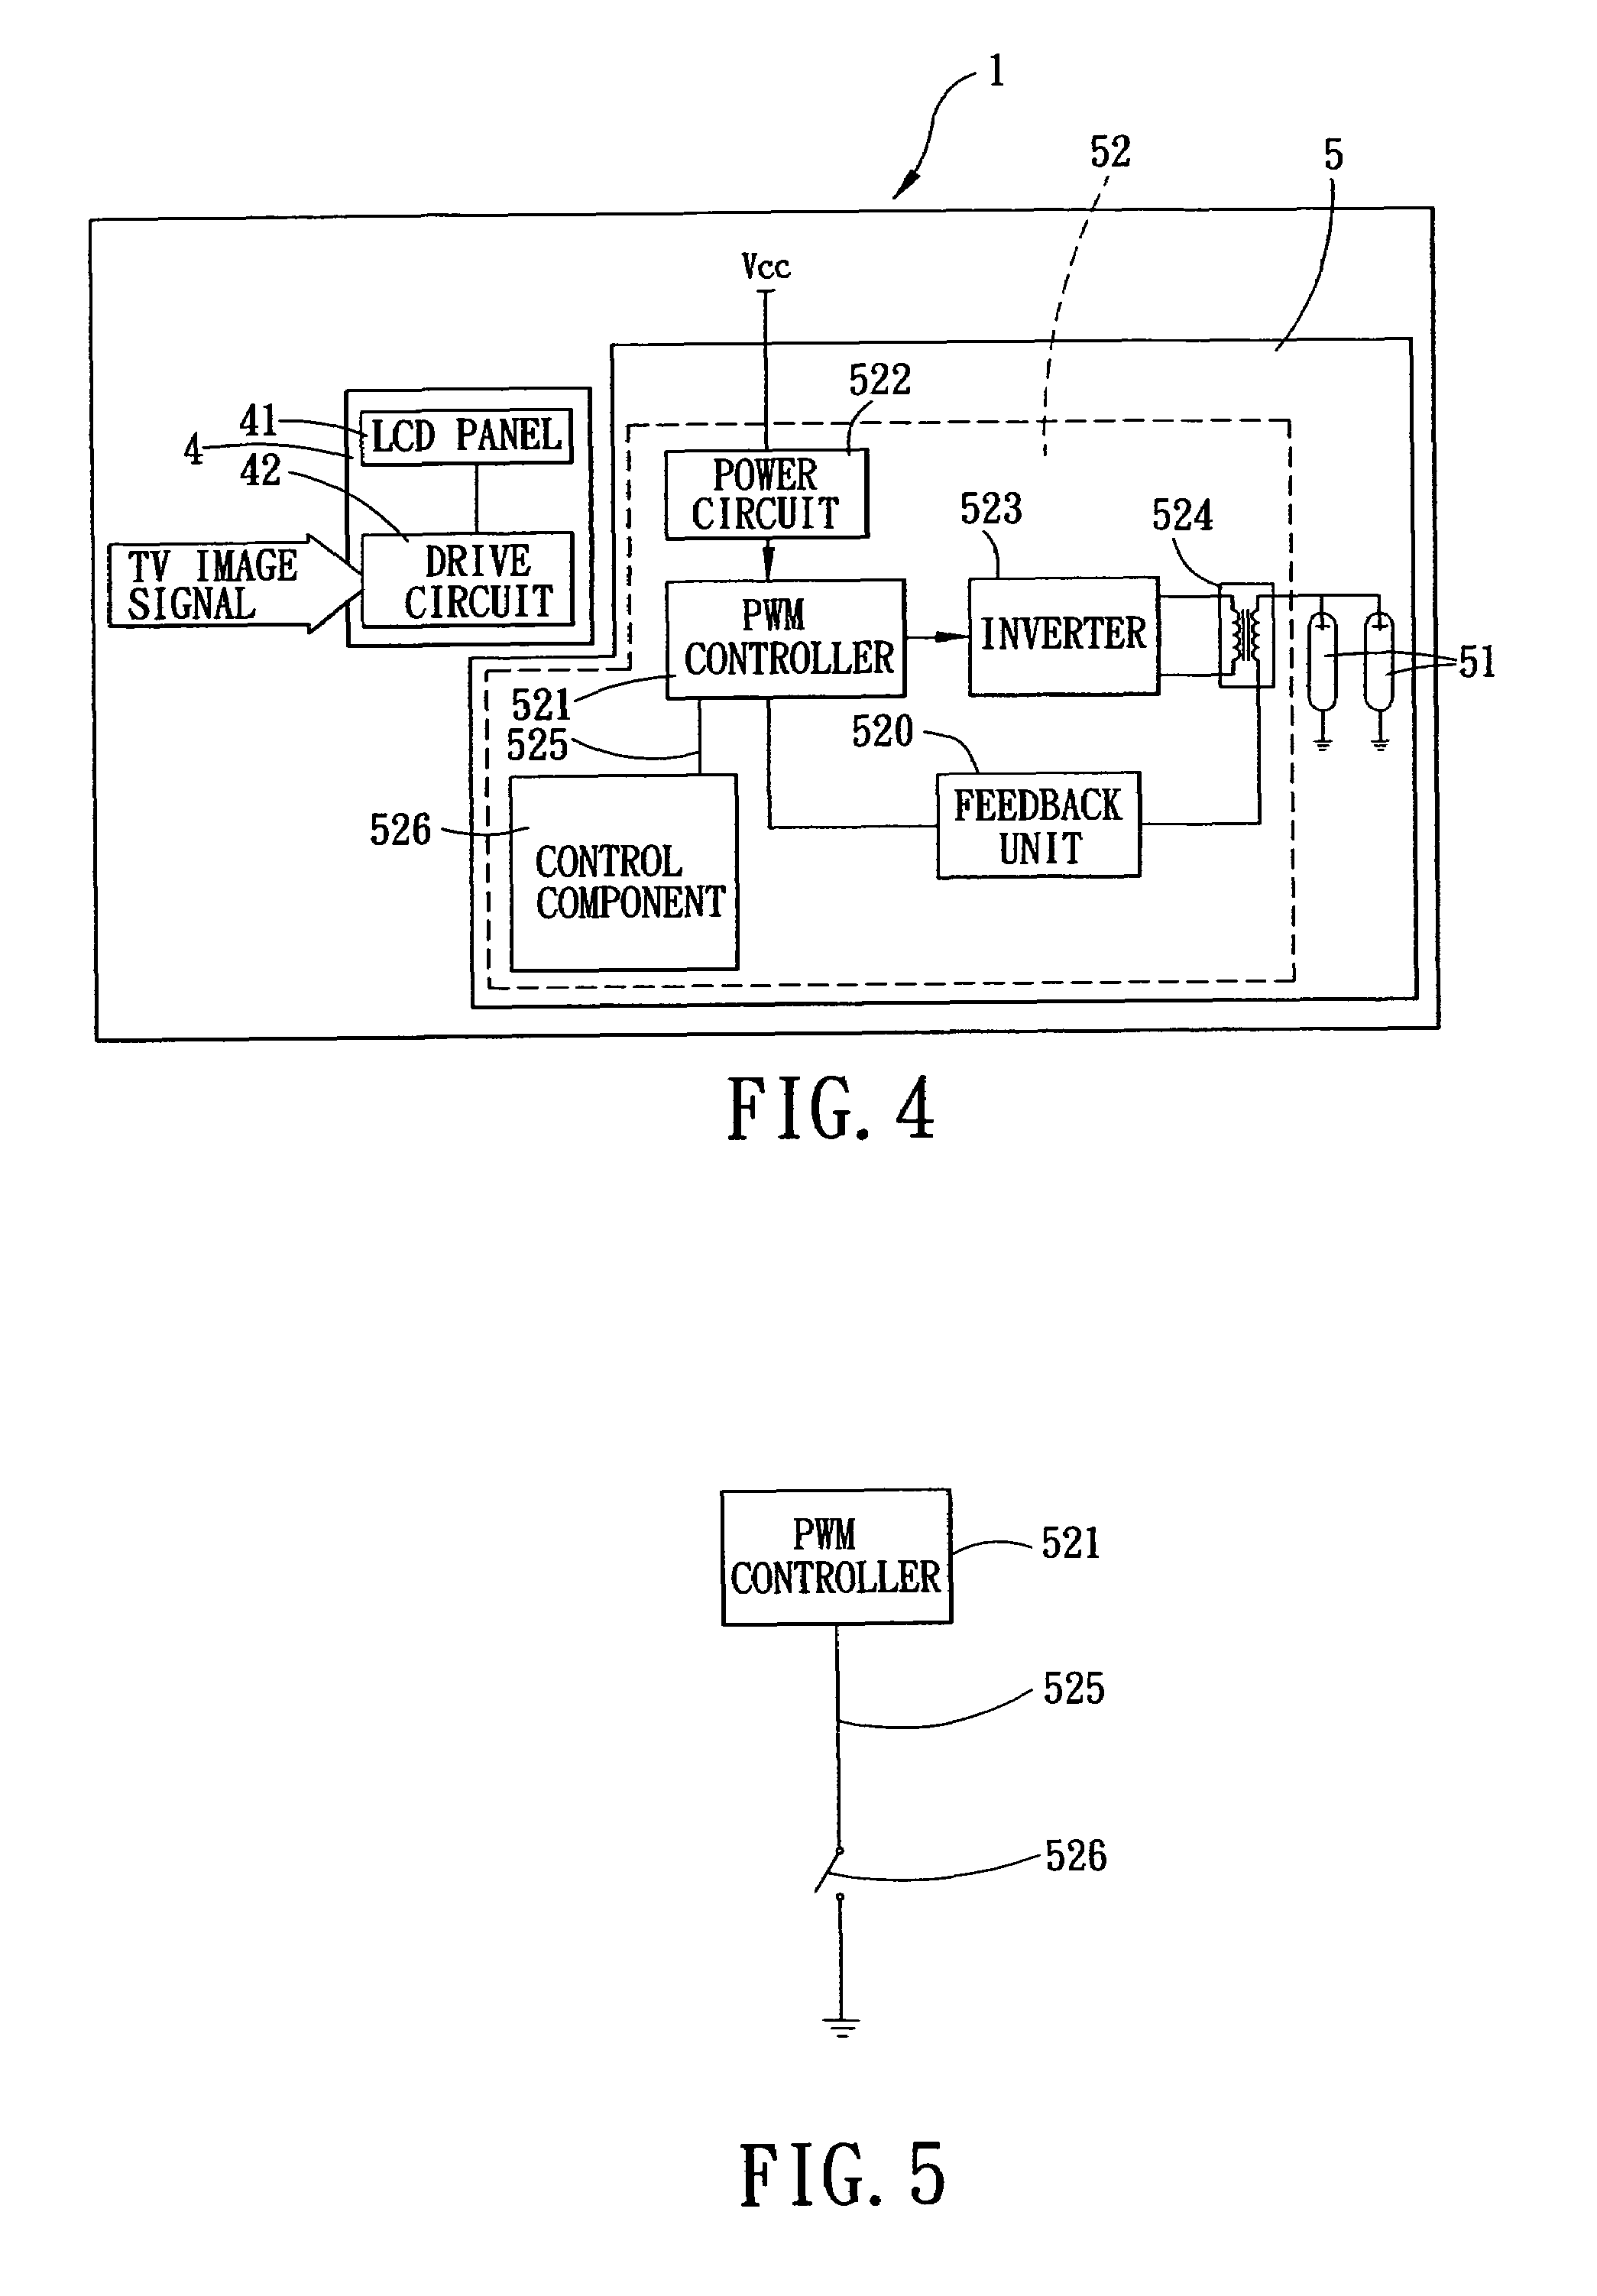 Television and back lighting source module capable of preventing harmonic interference